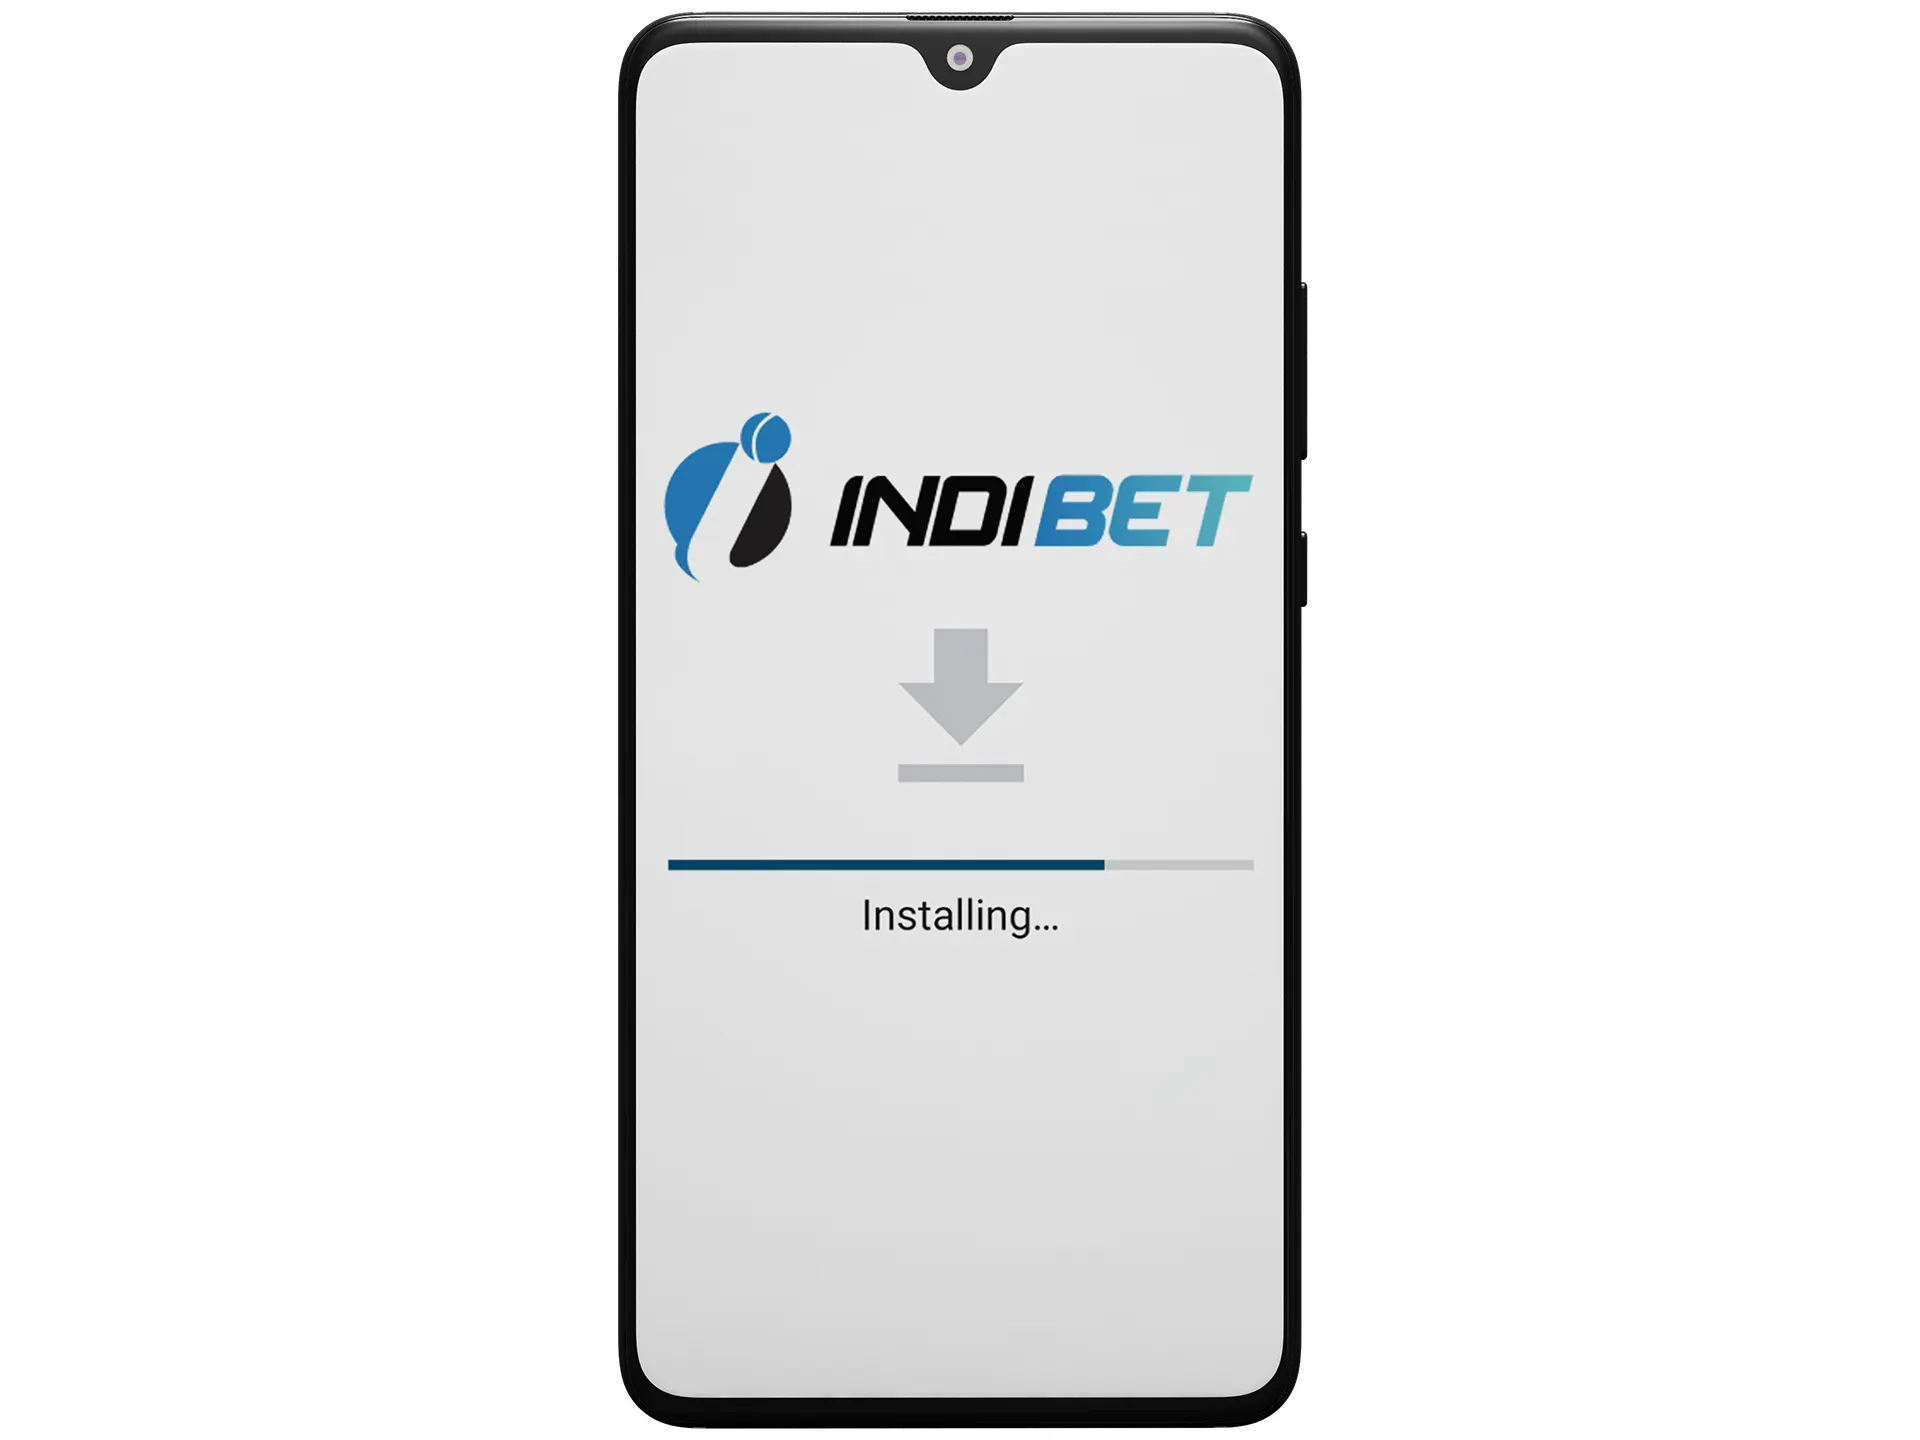 Indibet App installation process takes a couple of minutes.